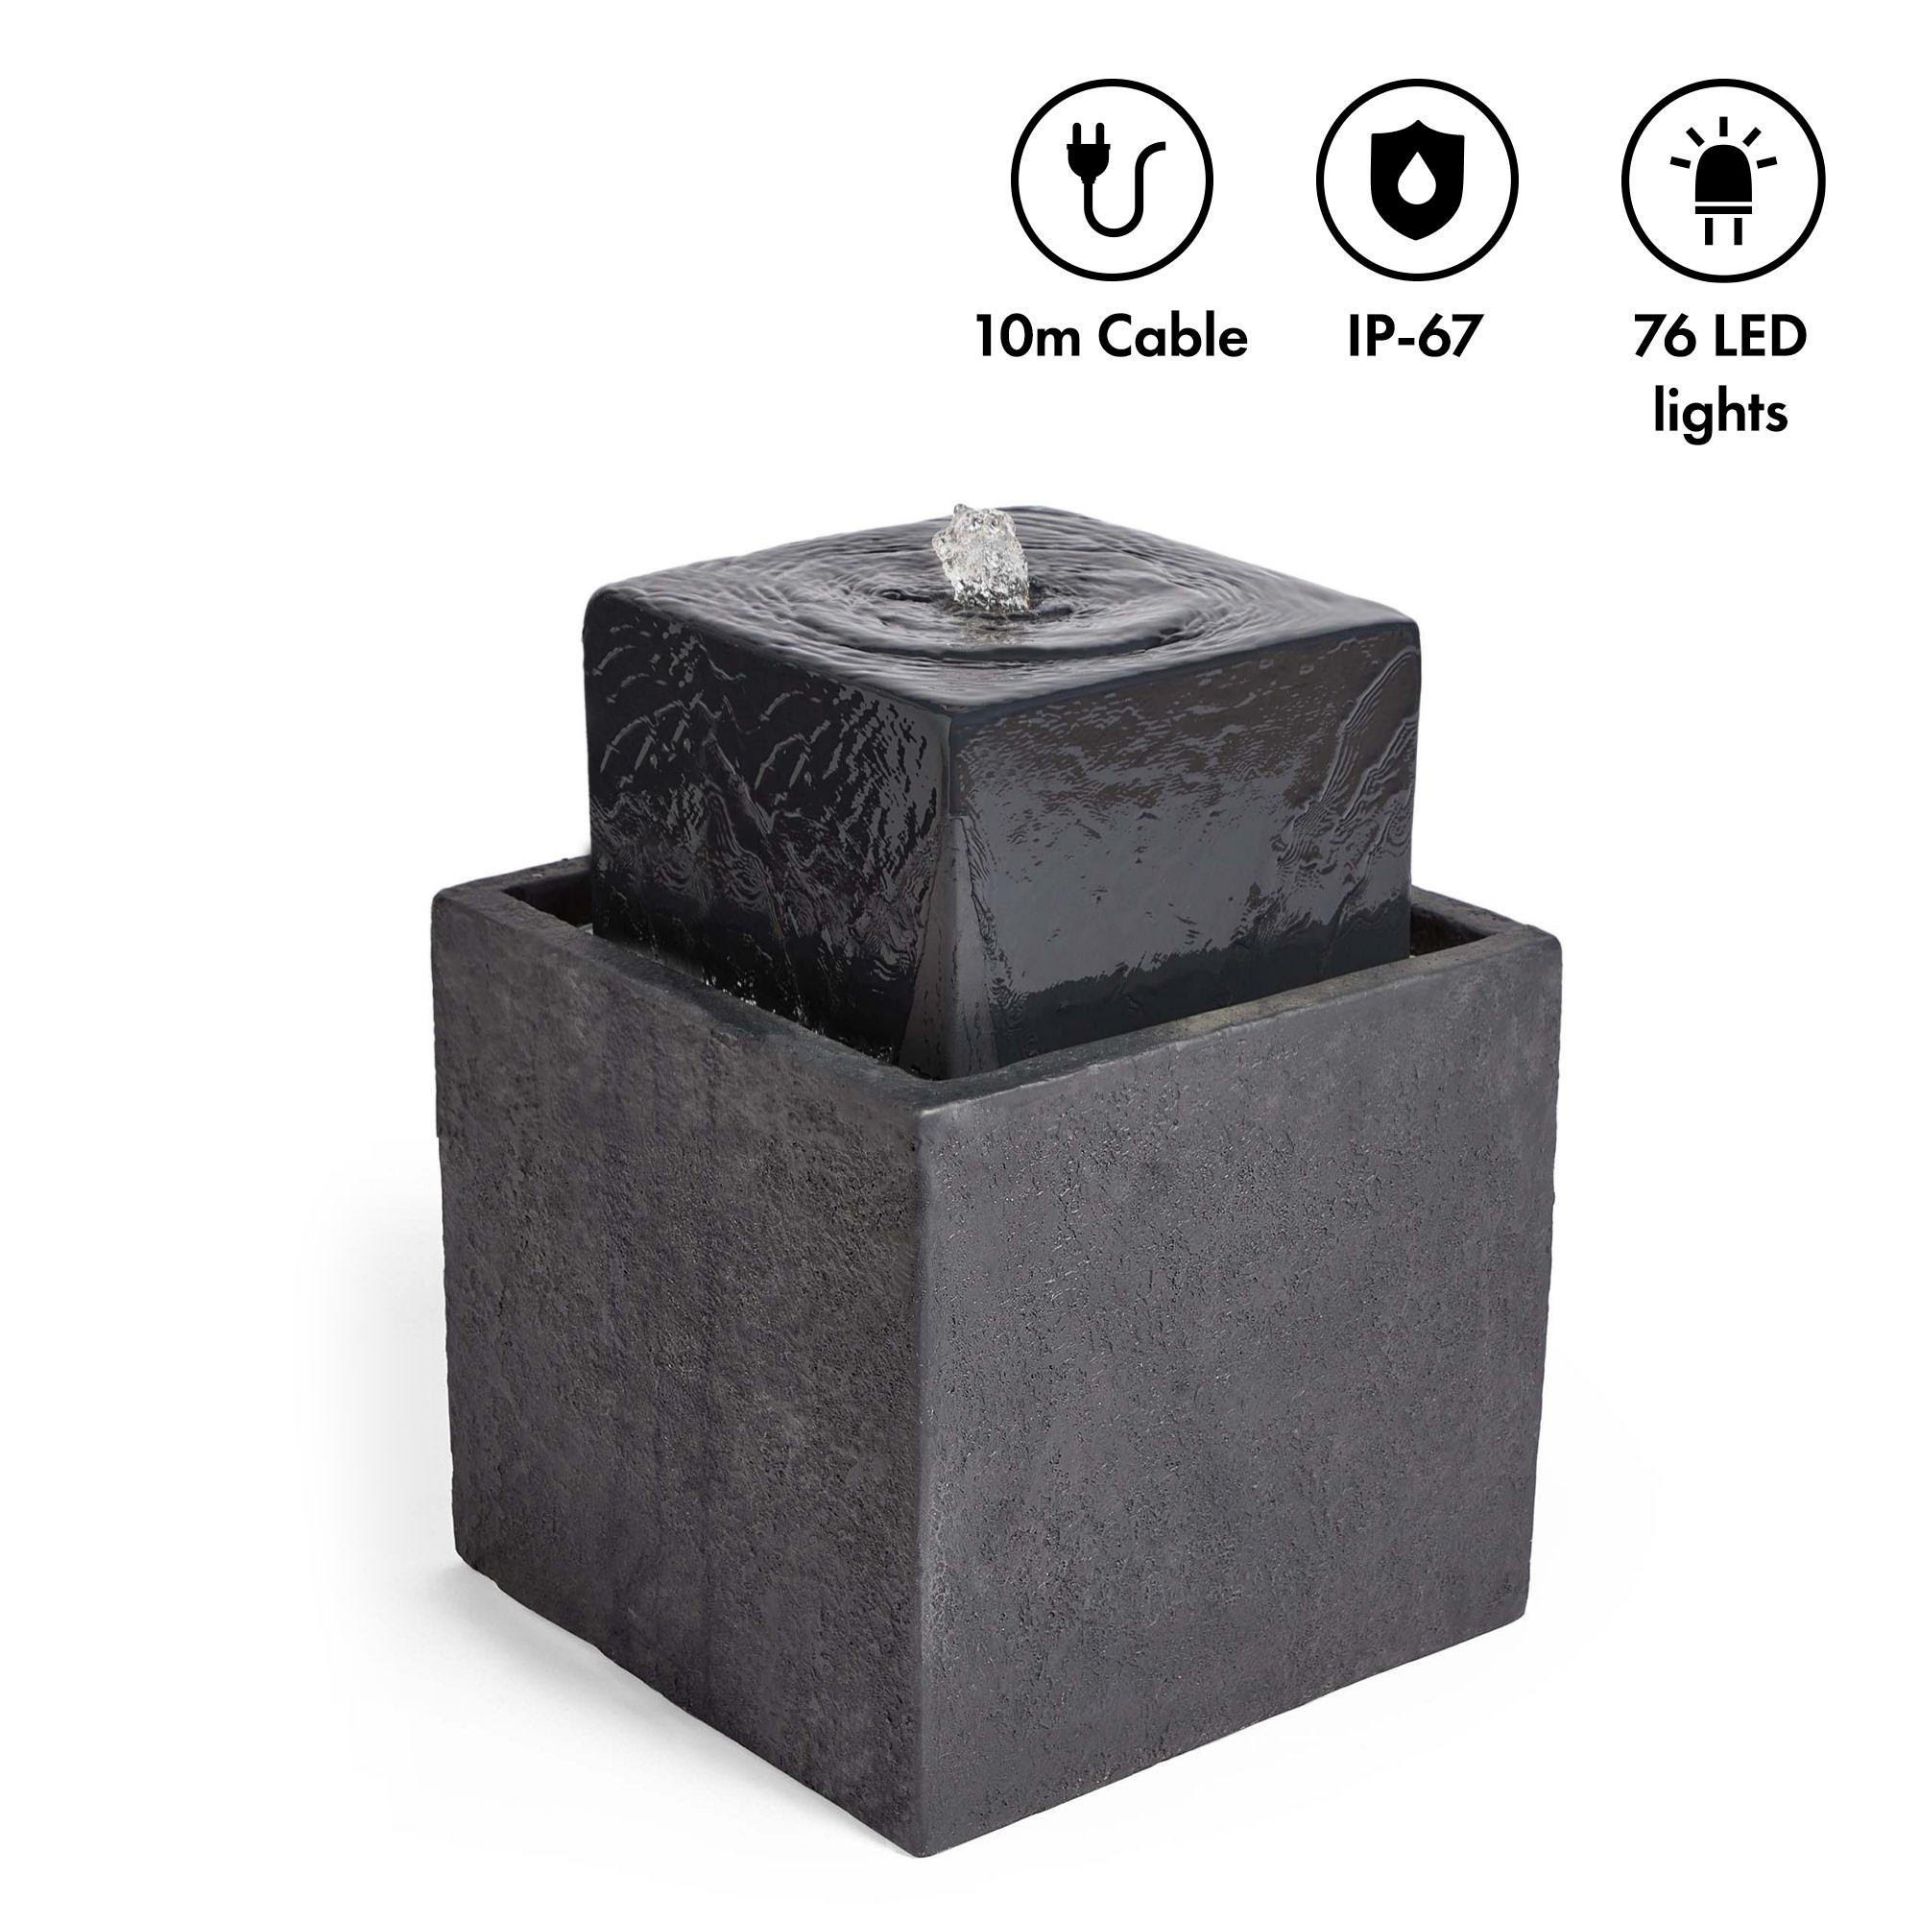 Trade Lot 5 x New & Boxed Square 2 Tier Water Feature. RRP £299.99. (REF671) – Indoor and Outdoor - Image 7 of 7